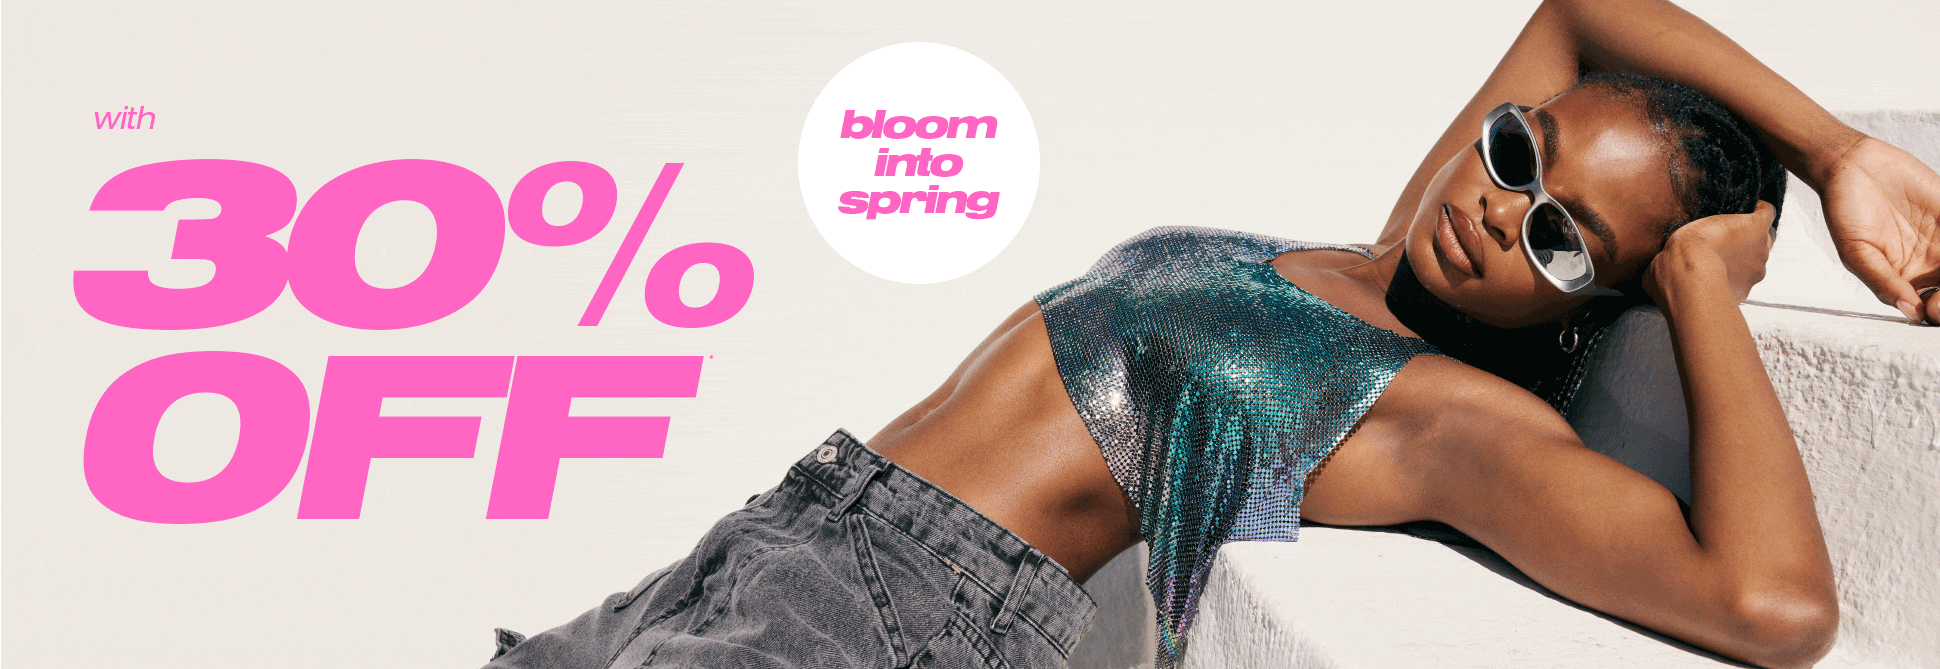 BLOOM INTO SPRING WITH 30% OFF!*